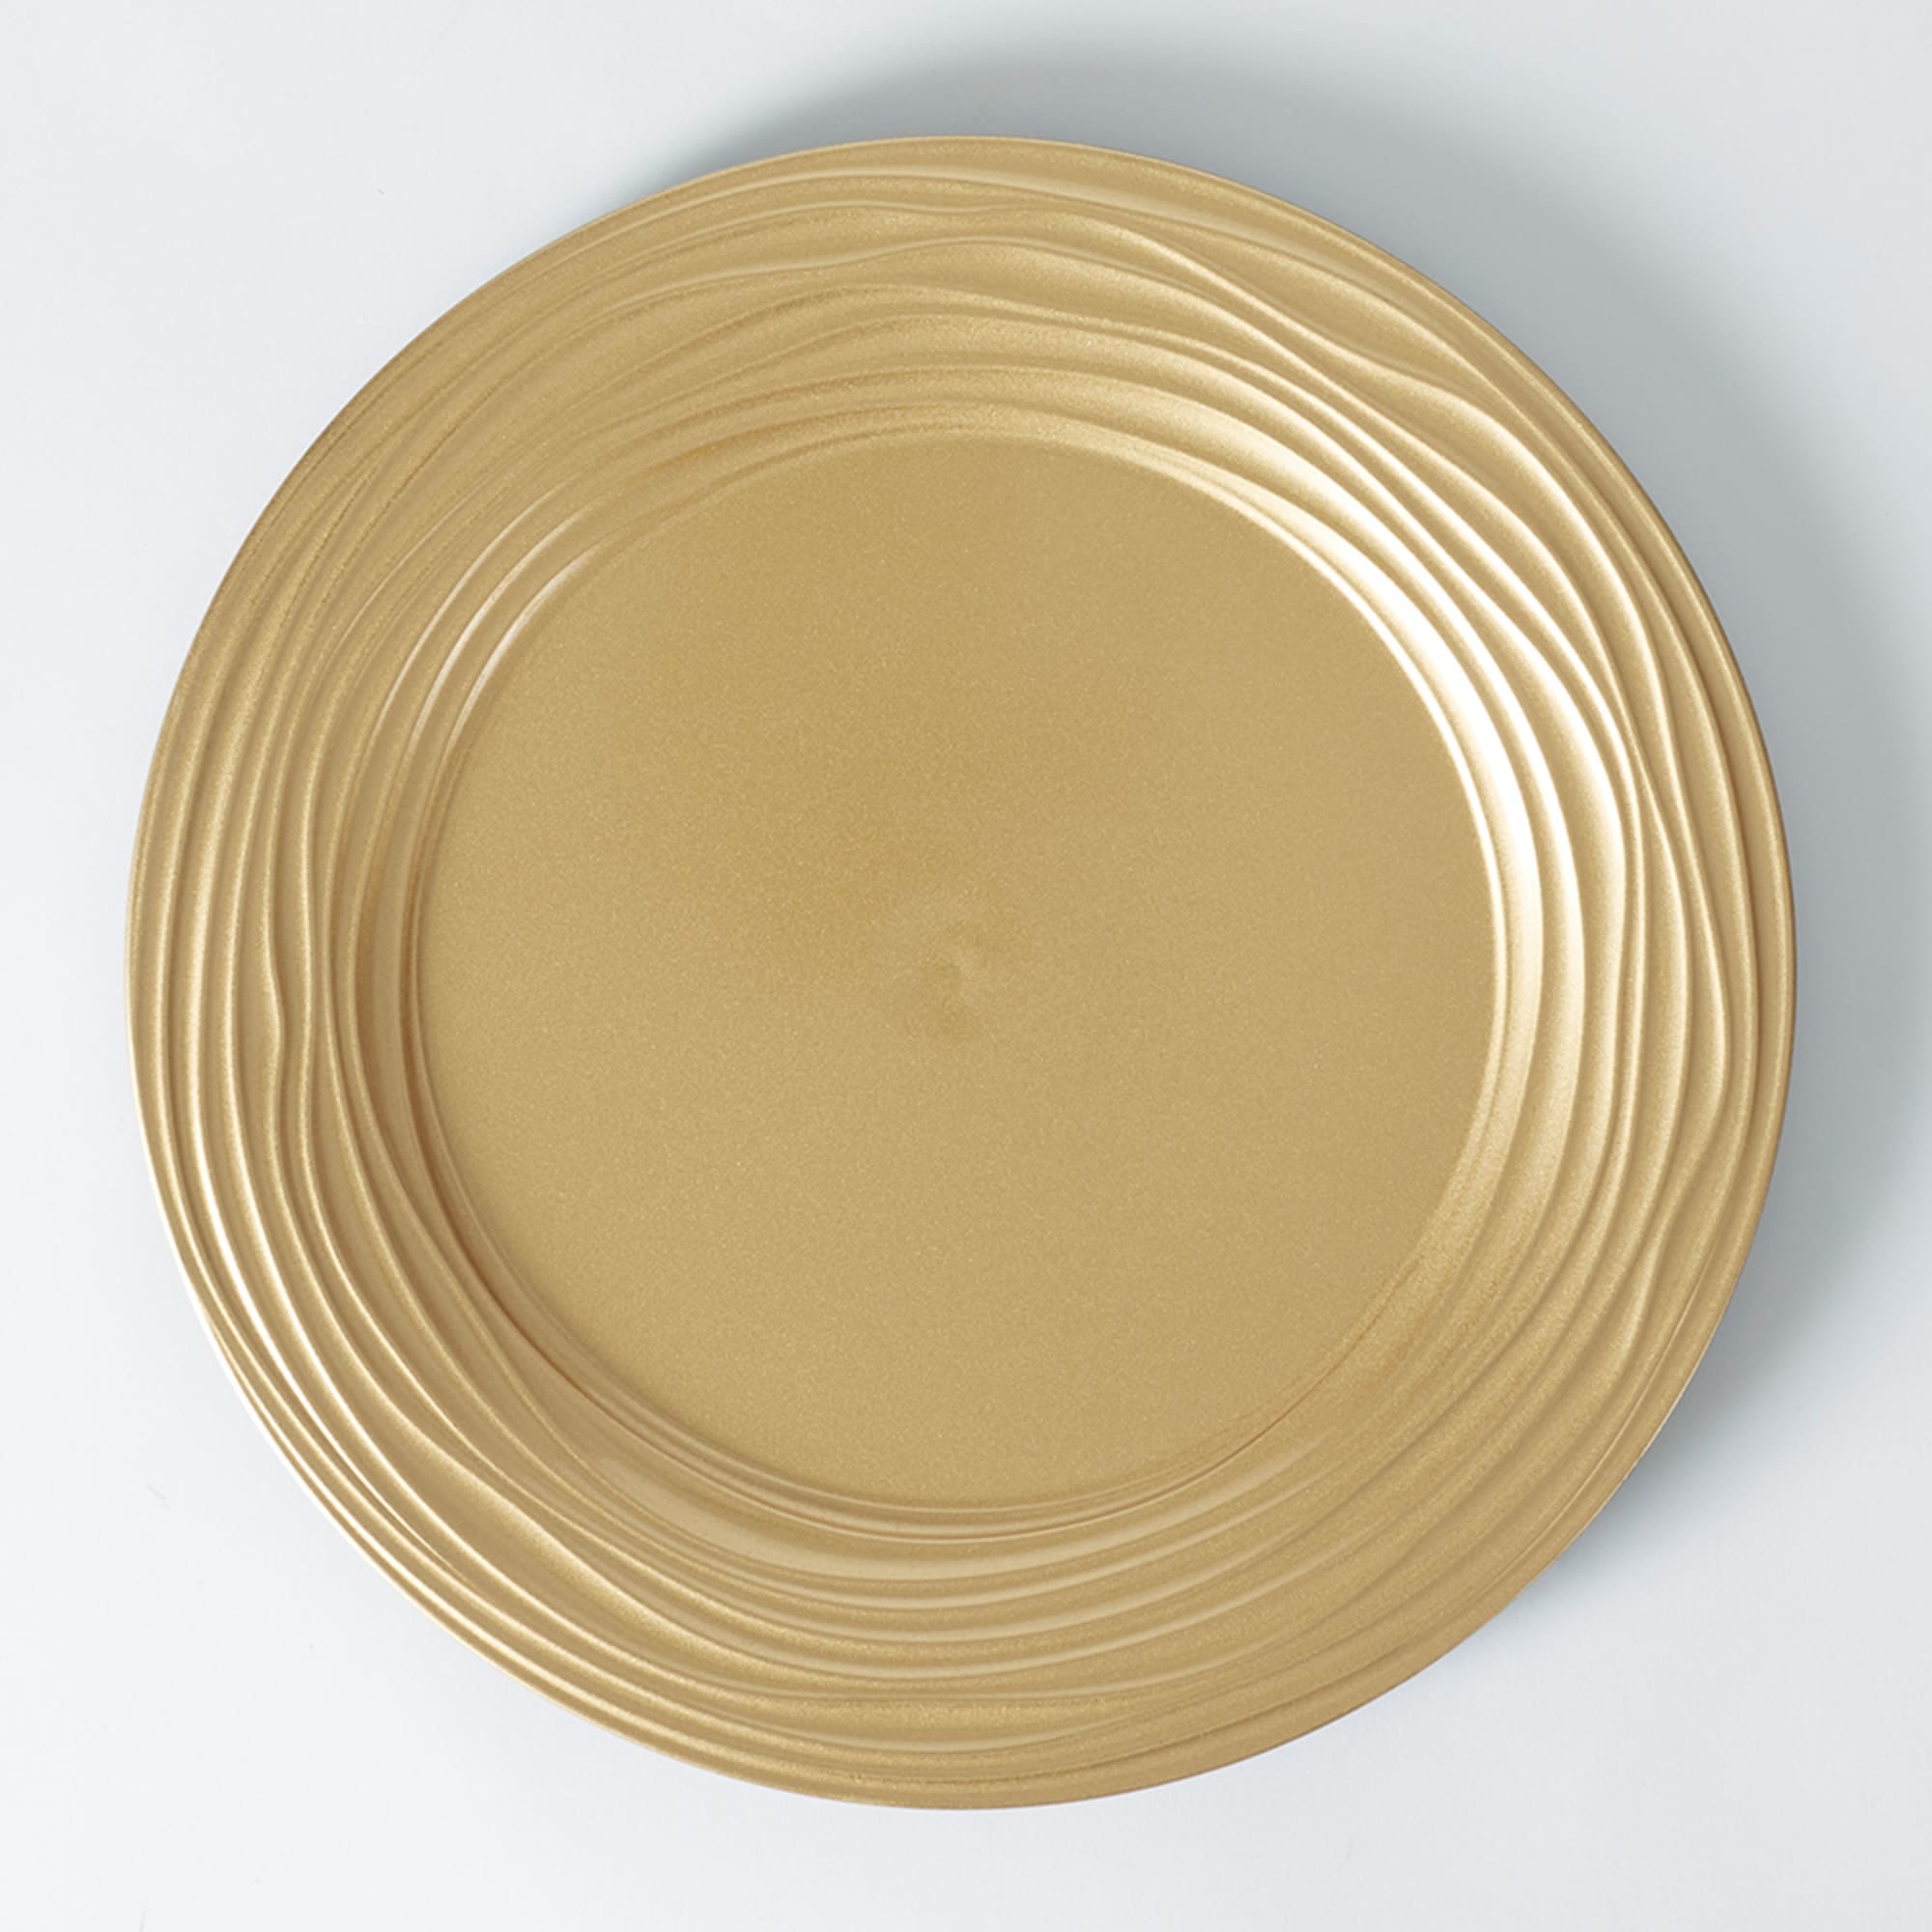 Sophia Grace 12" Charger Plate, Regal Gold $2.00 EACH, CASE PACK OF 12